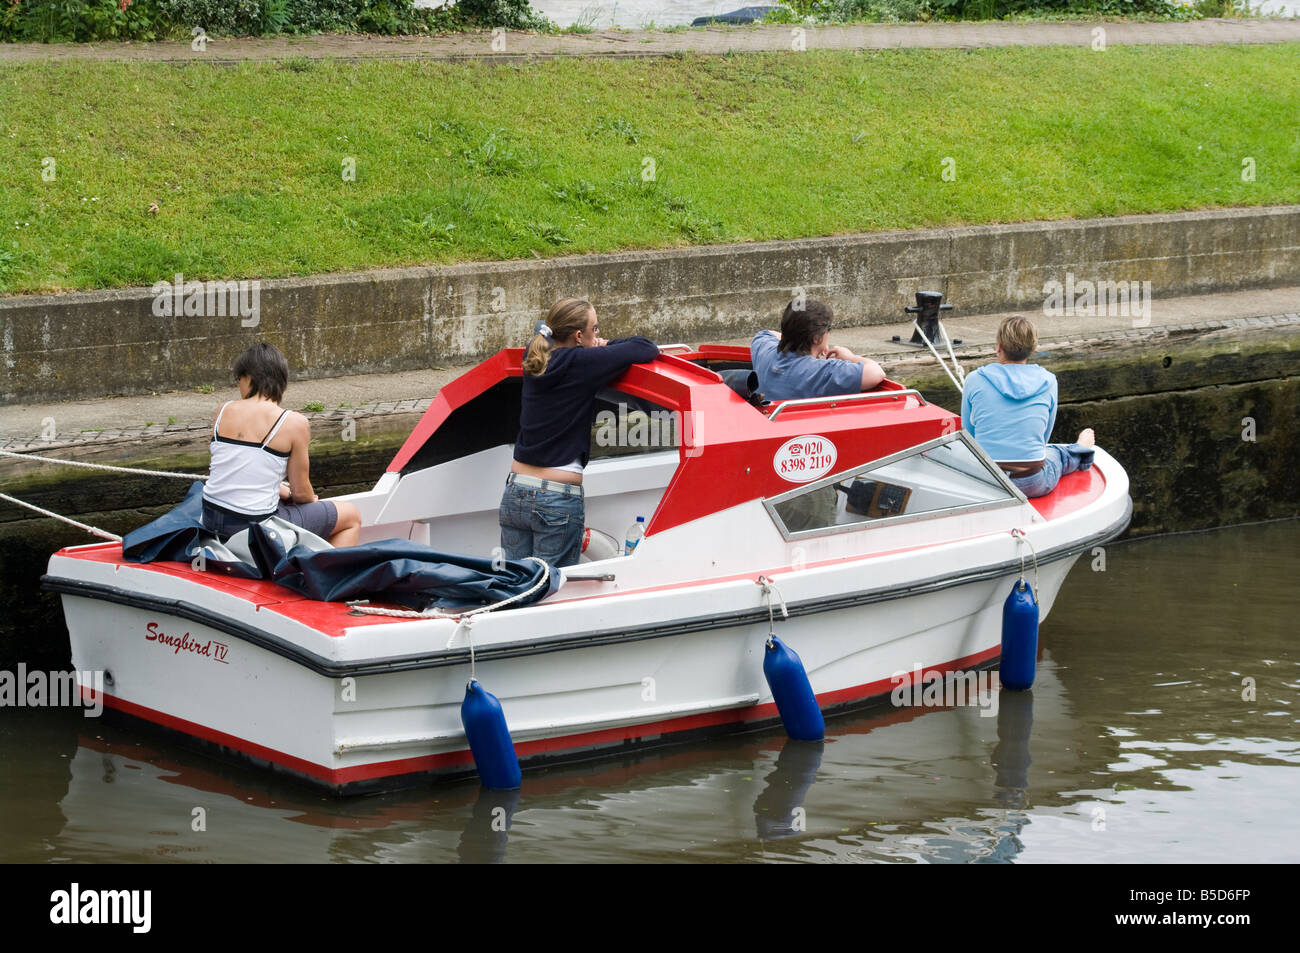 Motorboat Hire Boat with teenagers teenage friends on Boating Day Out in Molesey Lock on the River Thames Molesey Surrey Stock Photo